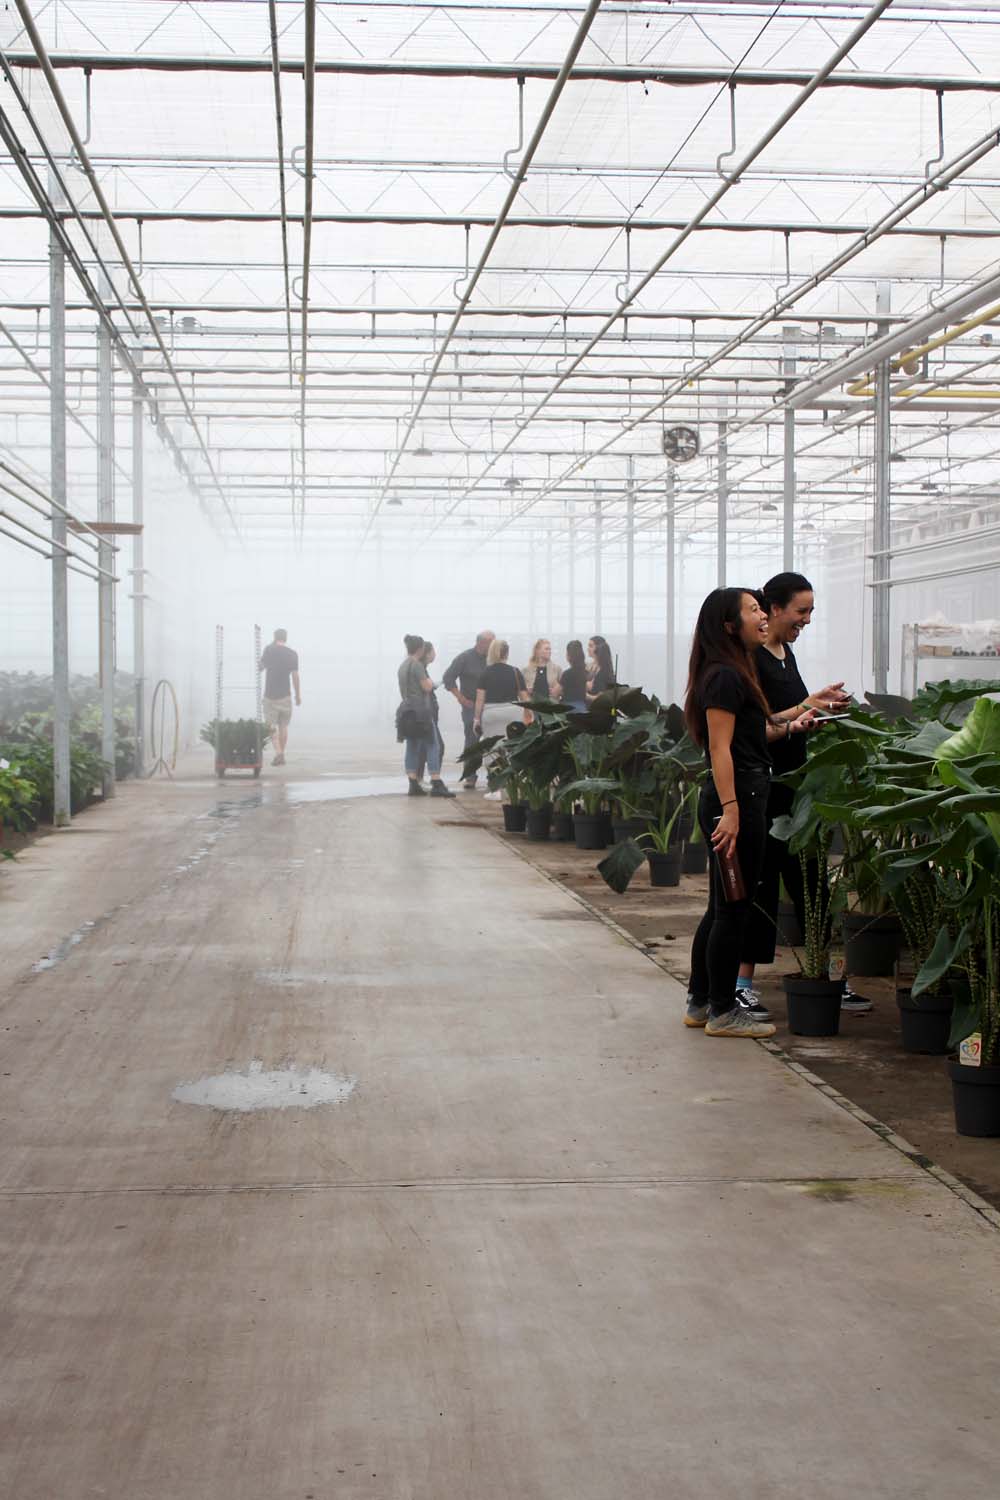 A misty glasshouse with people looking at plants